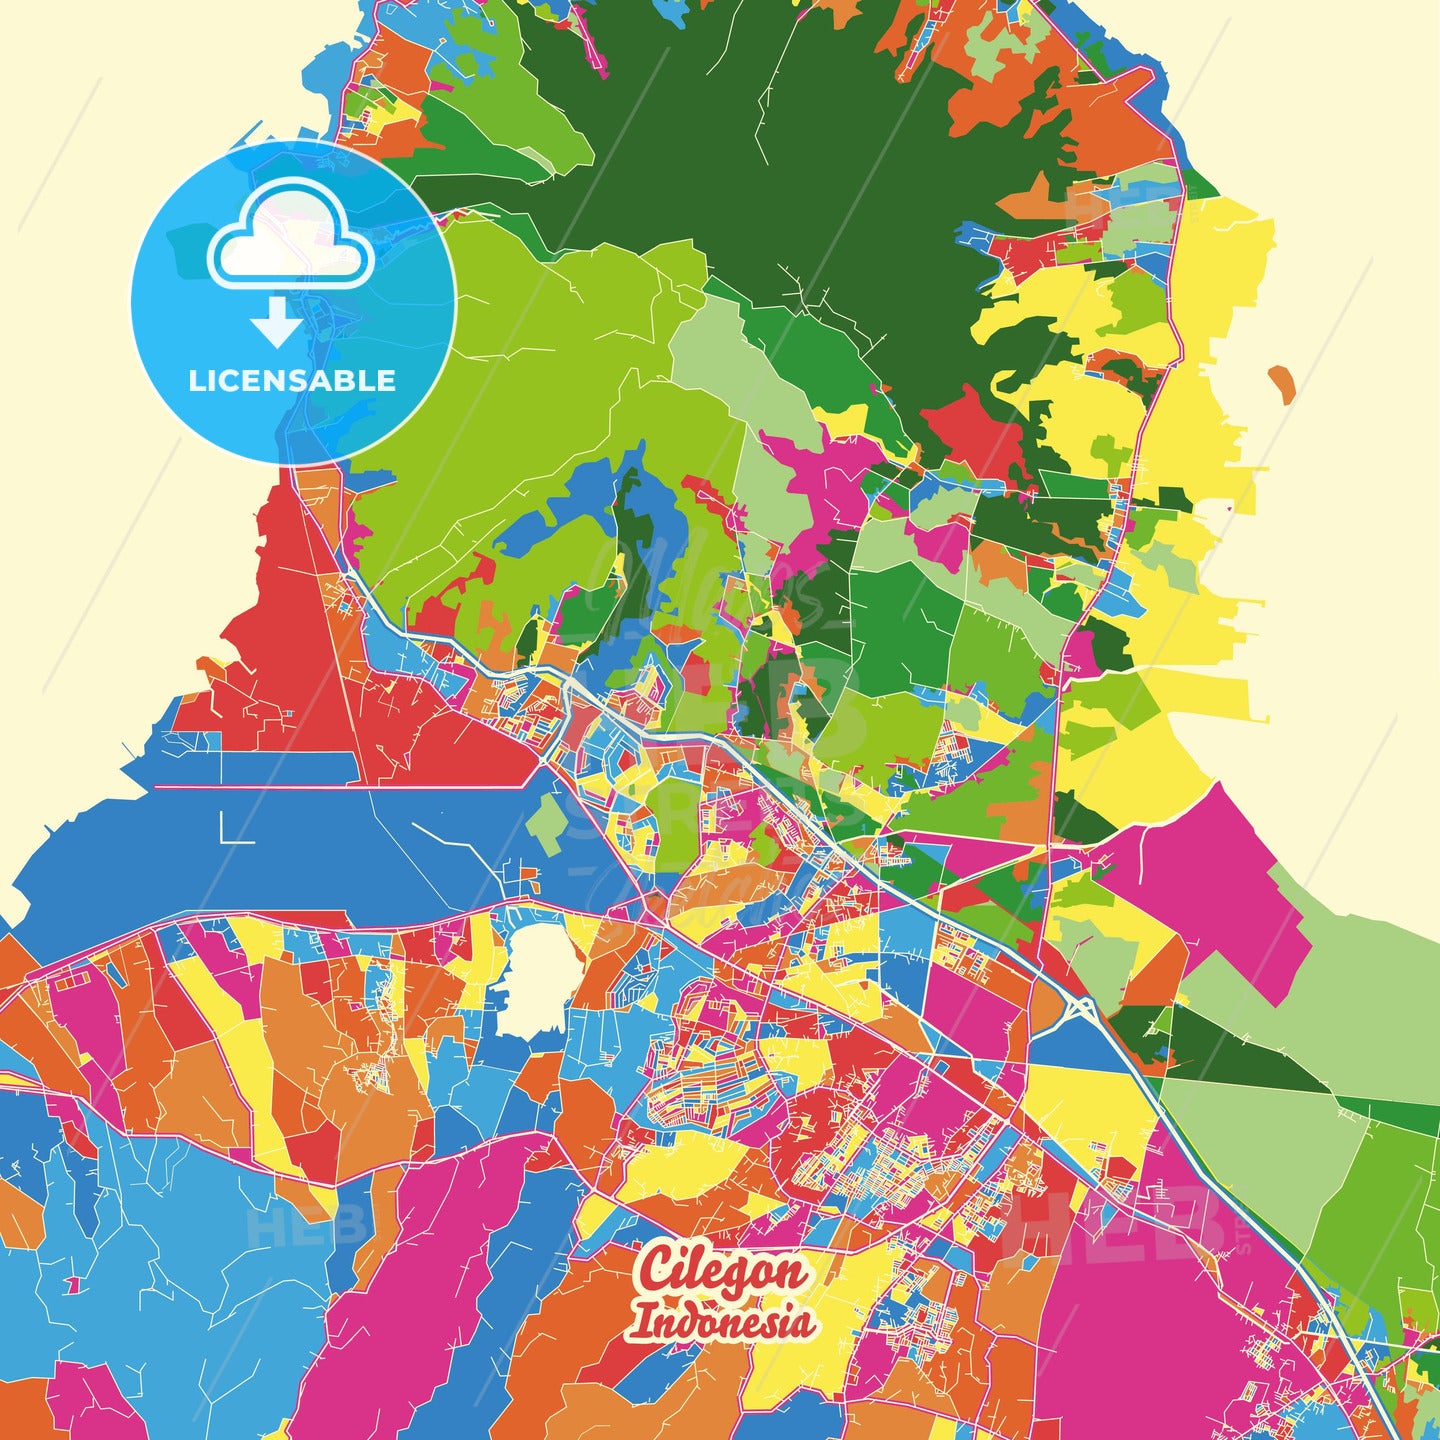 Cilegon, Indonesia Crazy Colorful Street Map Poster Template - HEBSTREITS Sketches